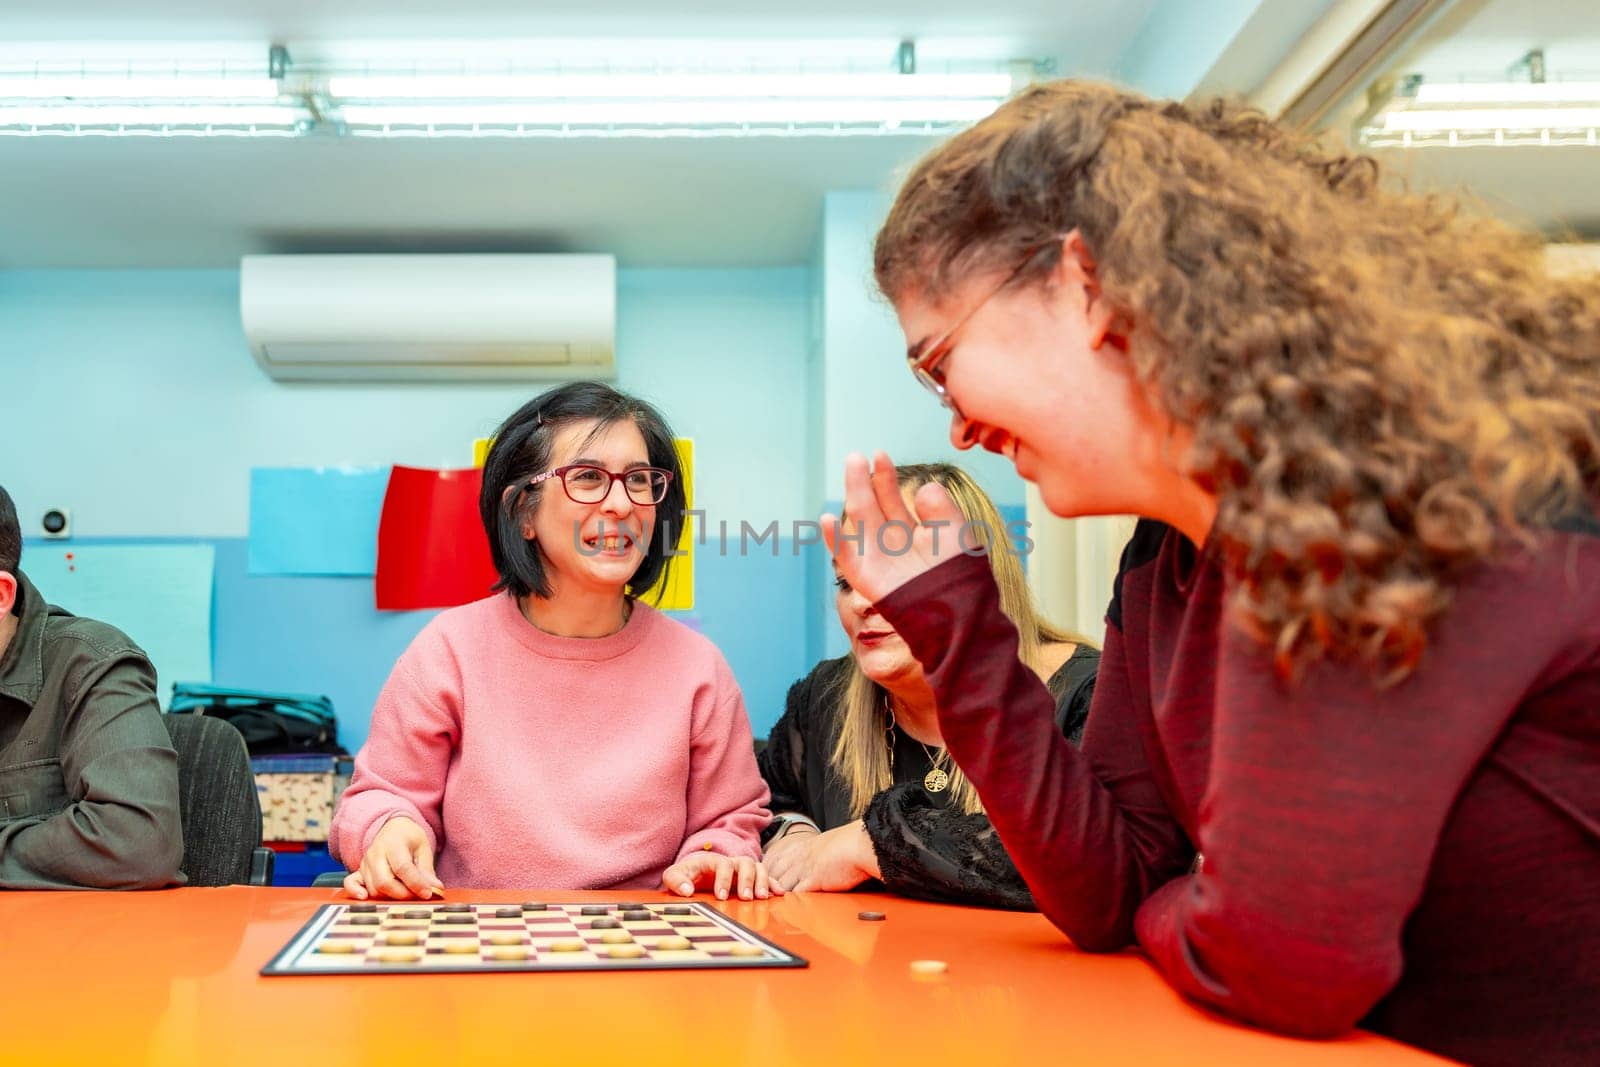 Caregiver and woman with special needs playing with board games by Huizi